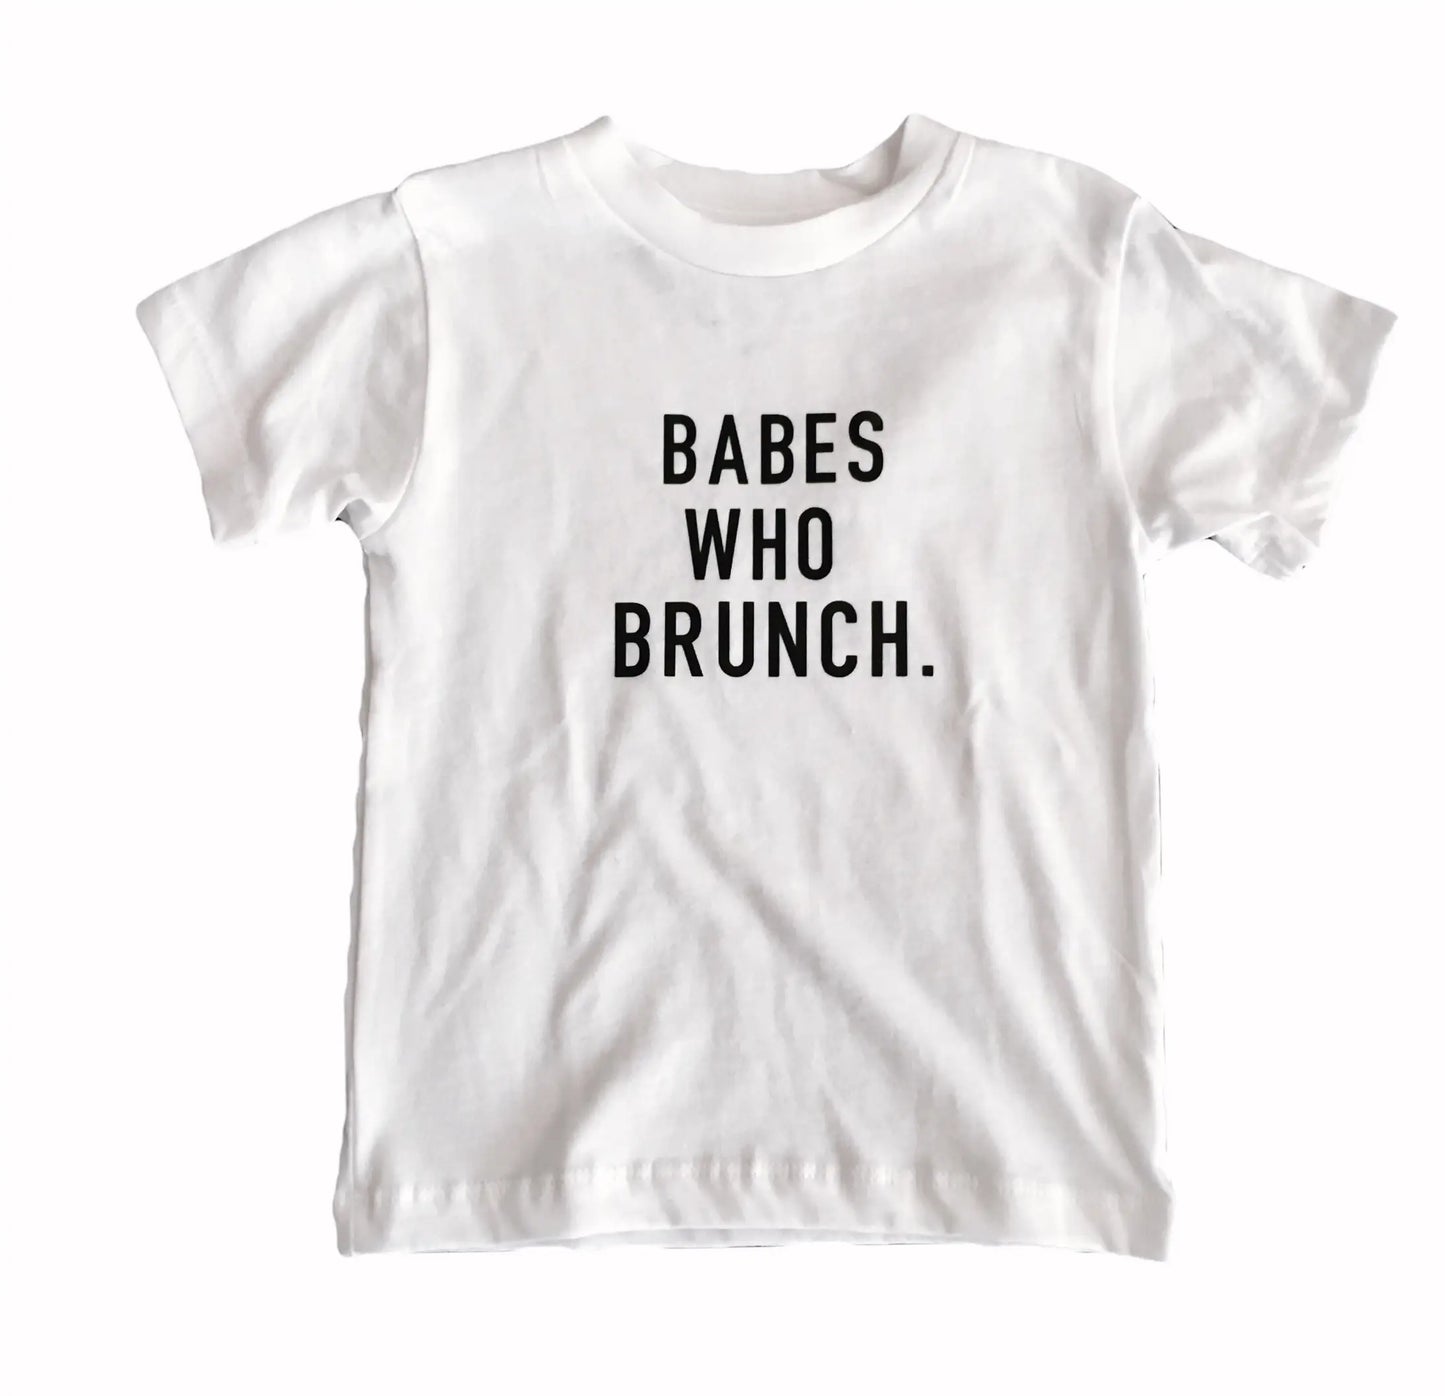 BABES WHO BRUNCH Tee